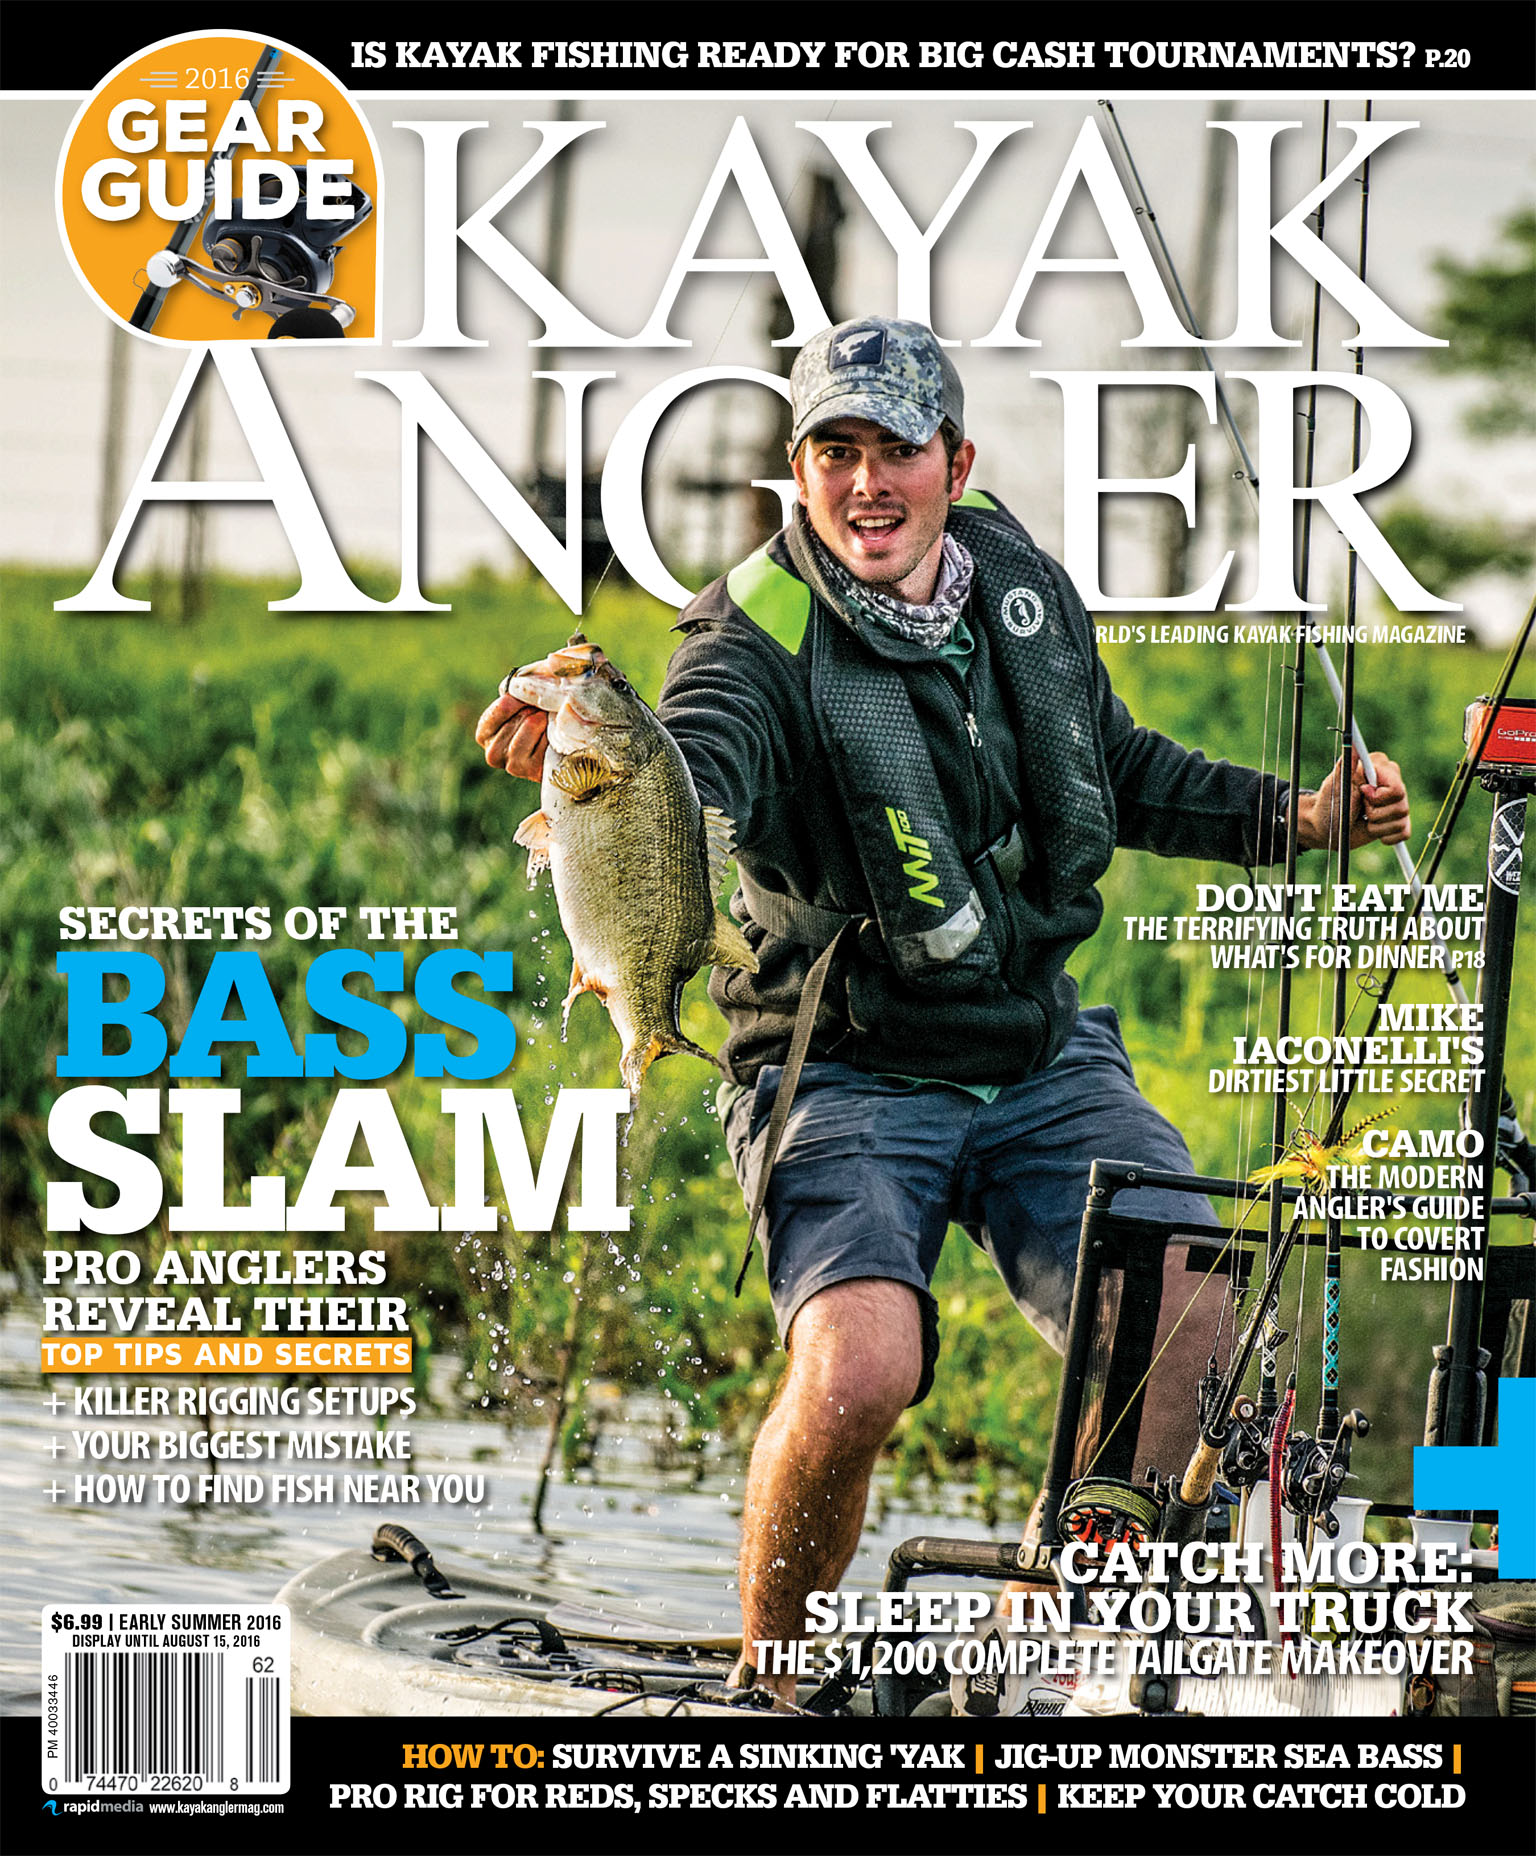 Cover of the Early Summer 2016 issue of Kayak Angler Magazine